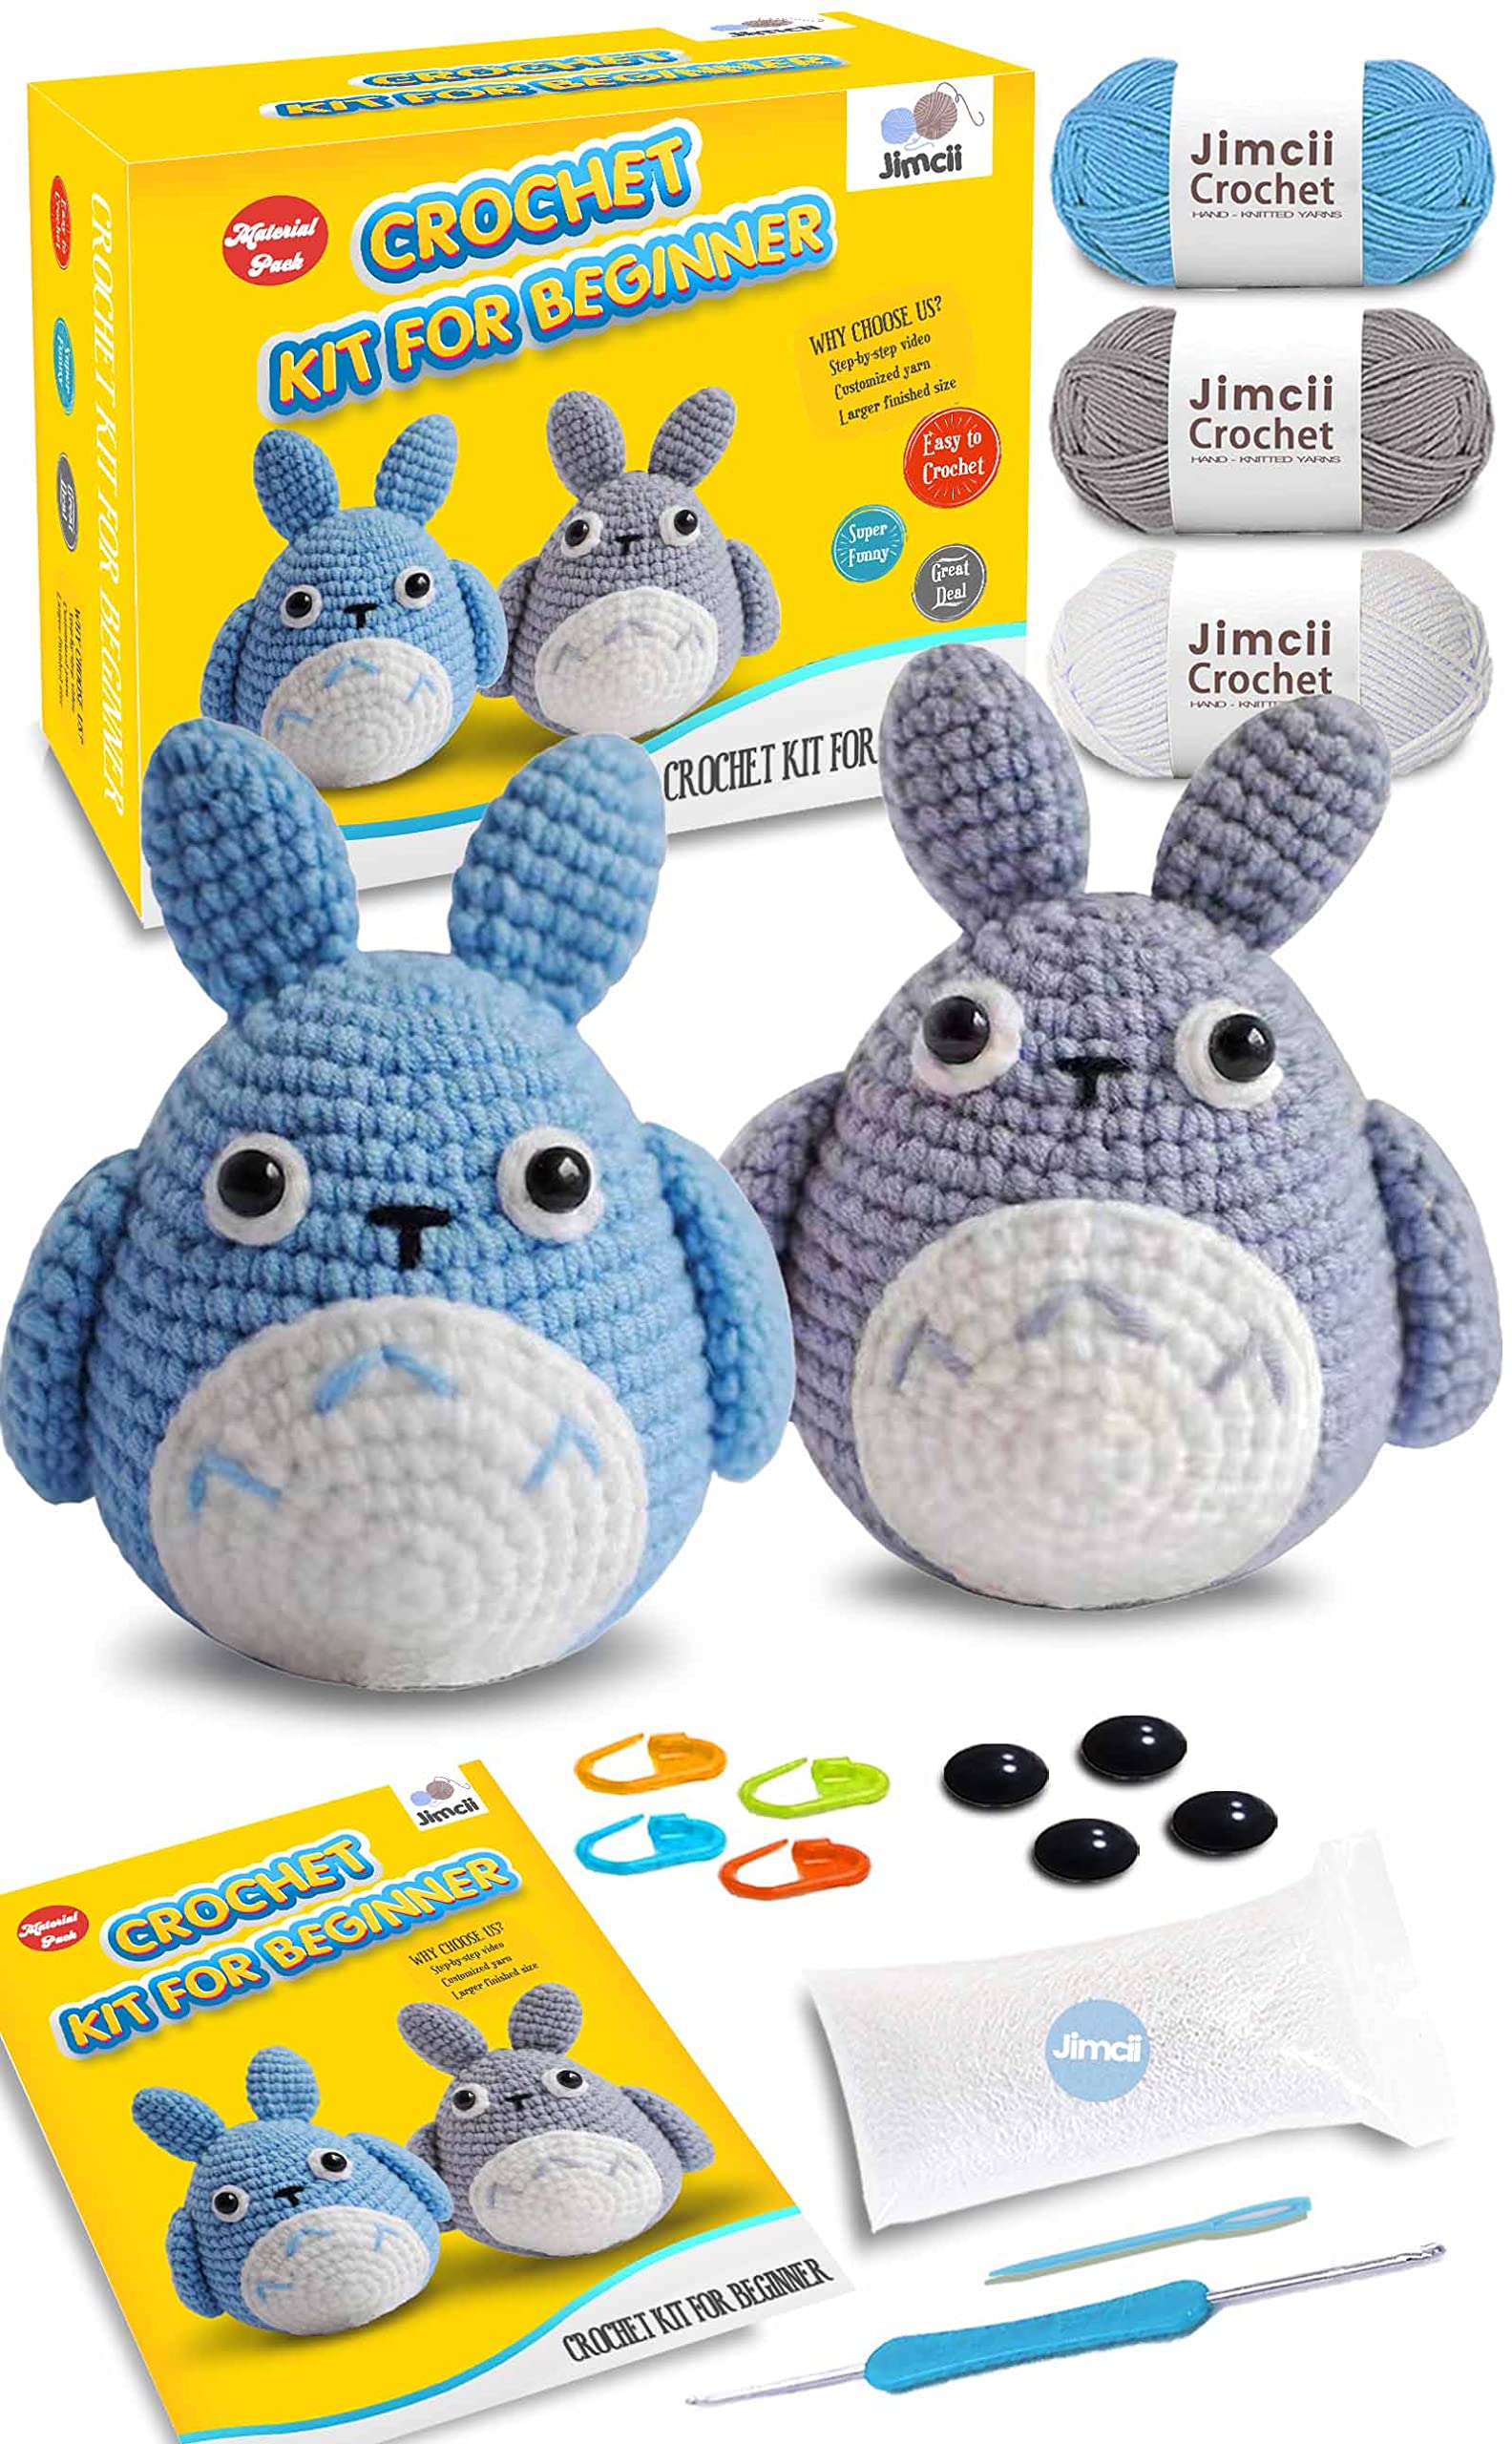 Crochet Kit for Beginners, Learn to Crochet Kits for Adults and